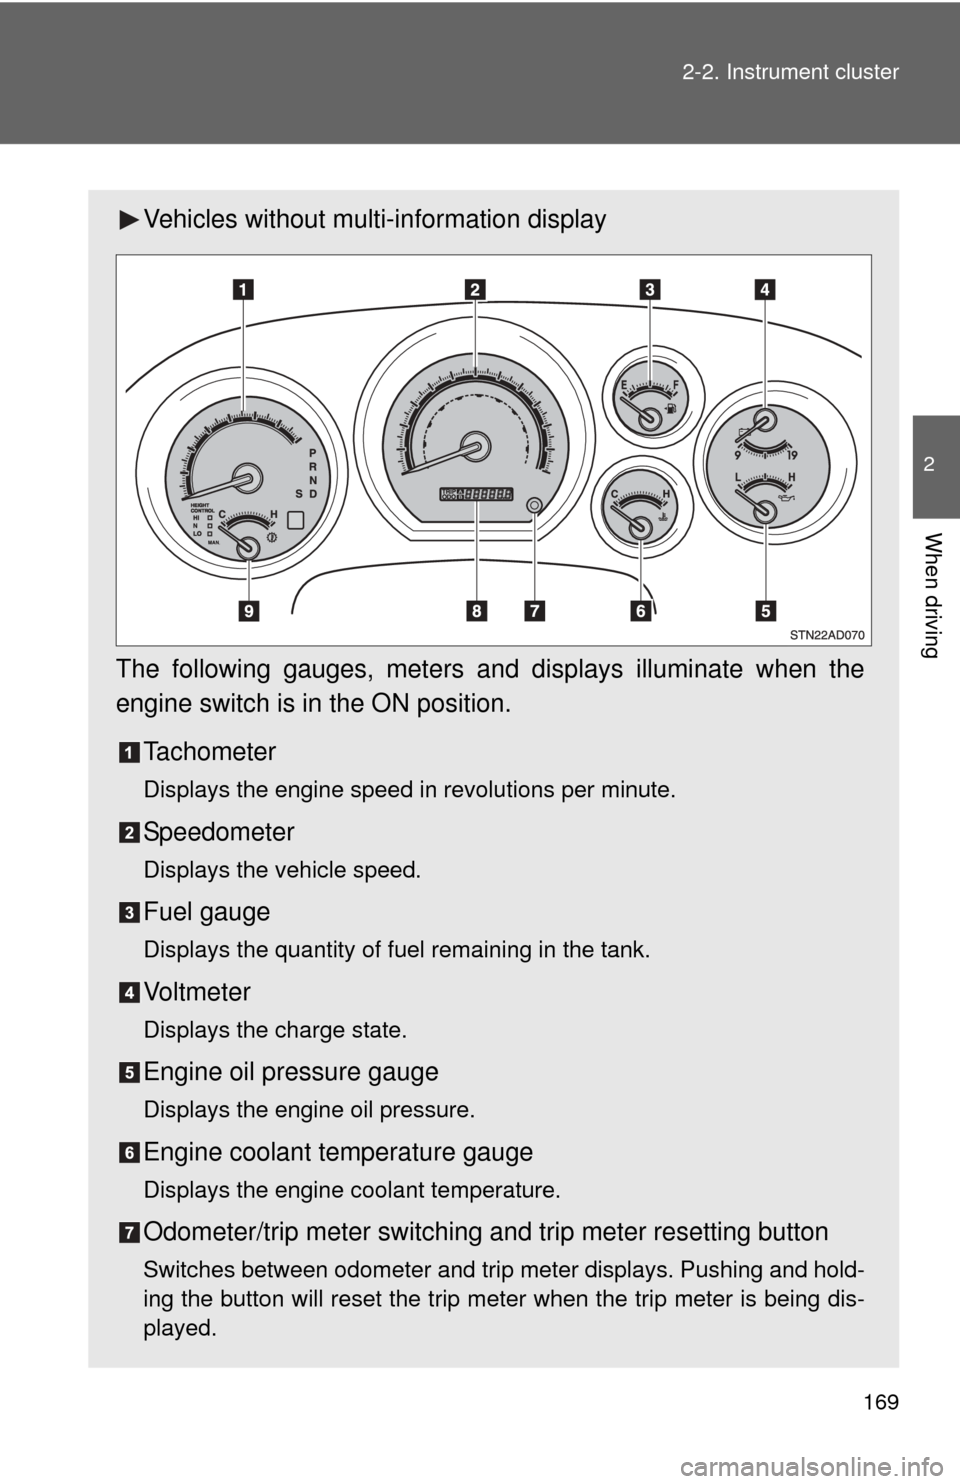 TOYOTA SEQUOIA 2011 2.G Owners Manual 169
2-2. Instrument cluster
2
When driving
Vehicles without multi-information display
The following gauges, meters and displays illuminate when the
engine switch is in the ON position. Tachometer
Disp